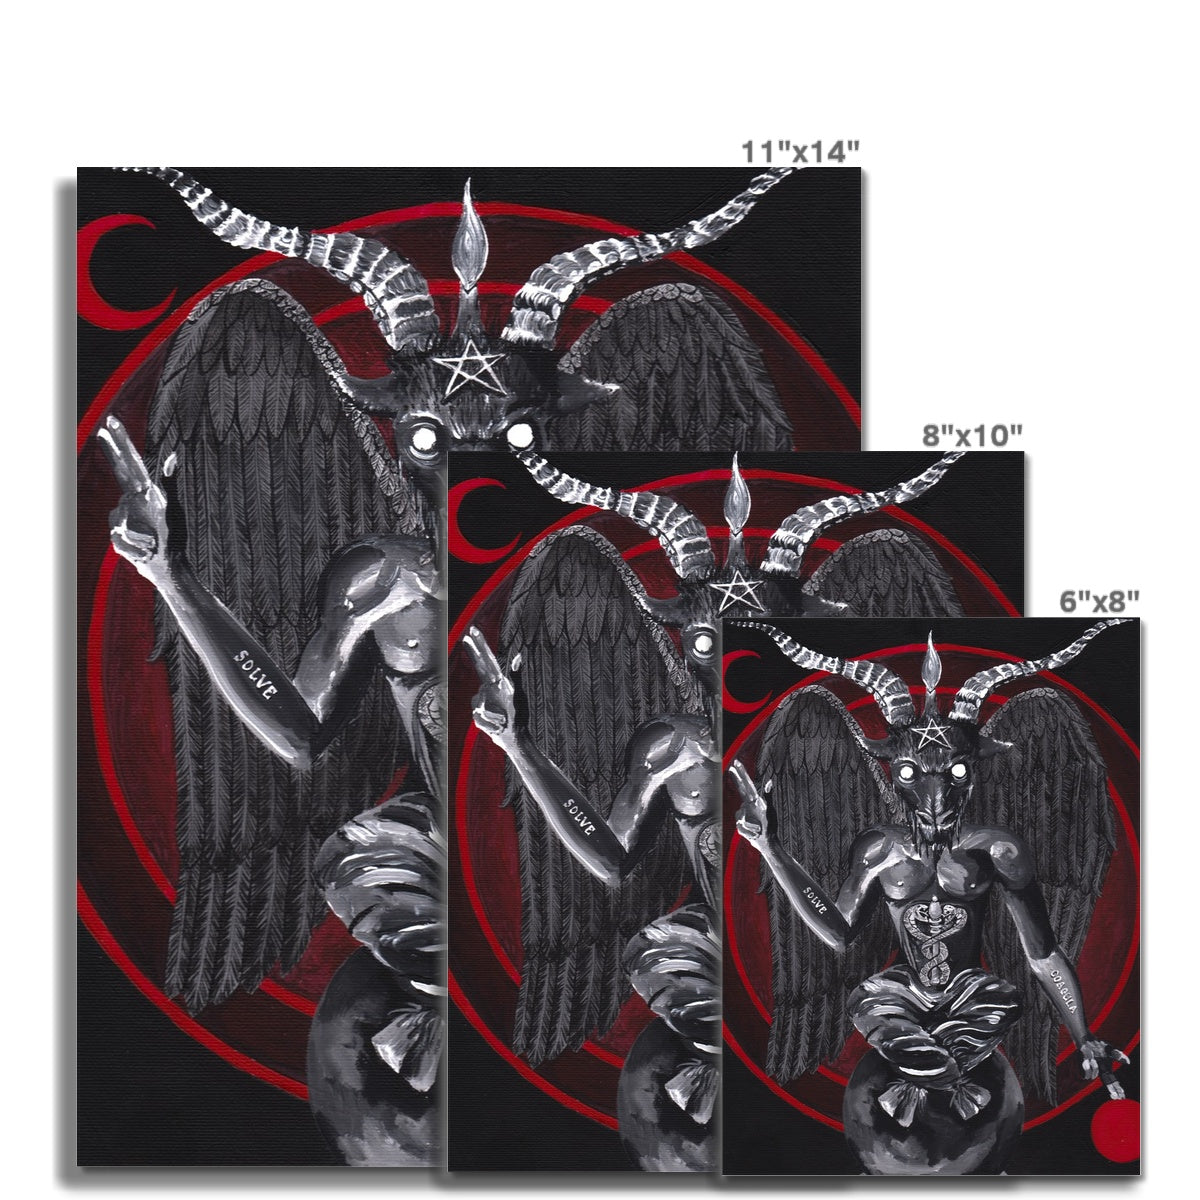 Photo of size variations 11" x 14", 8" x 10", 6" x 8" available for artist Kathryn Mason's 'Baphomet' occult style colour fine art print